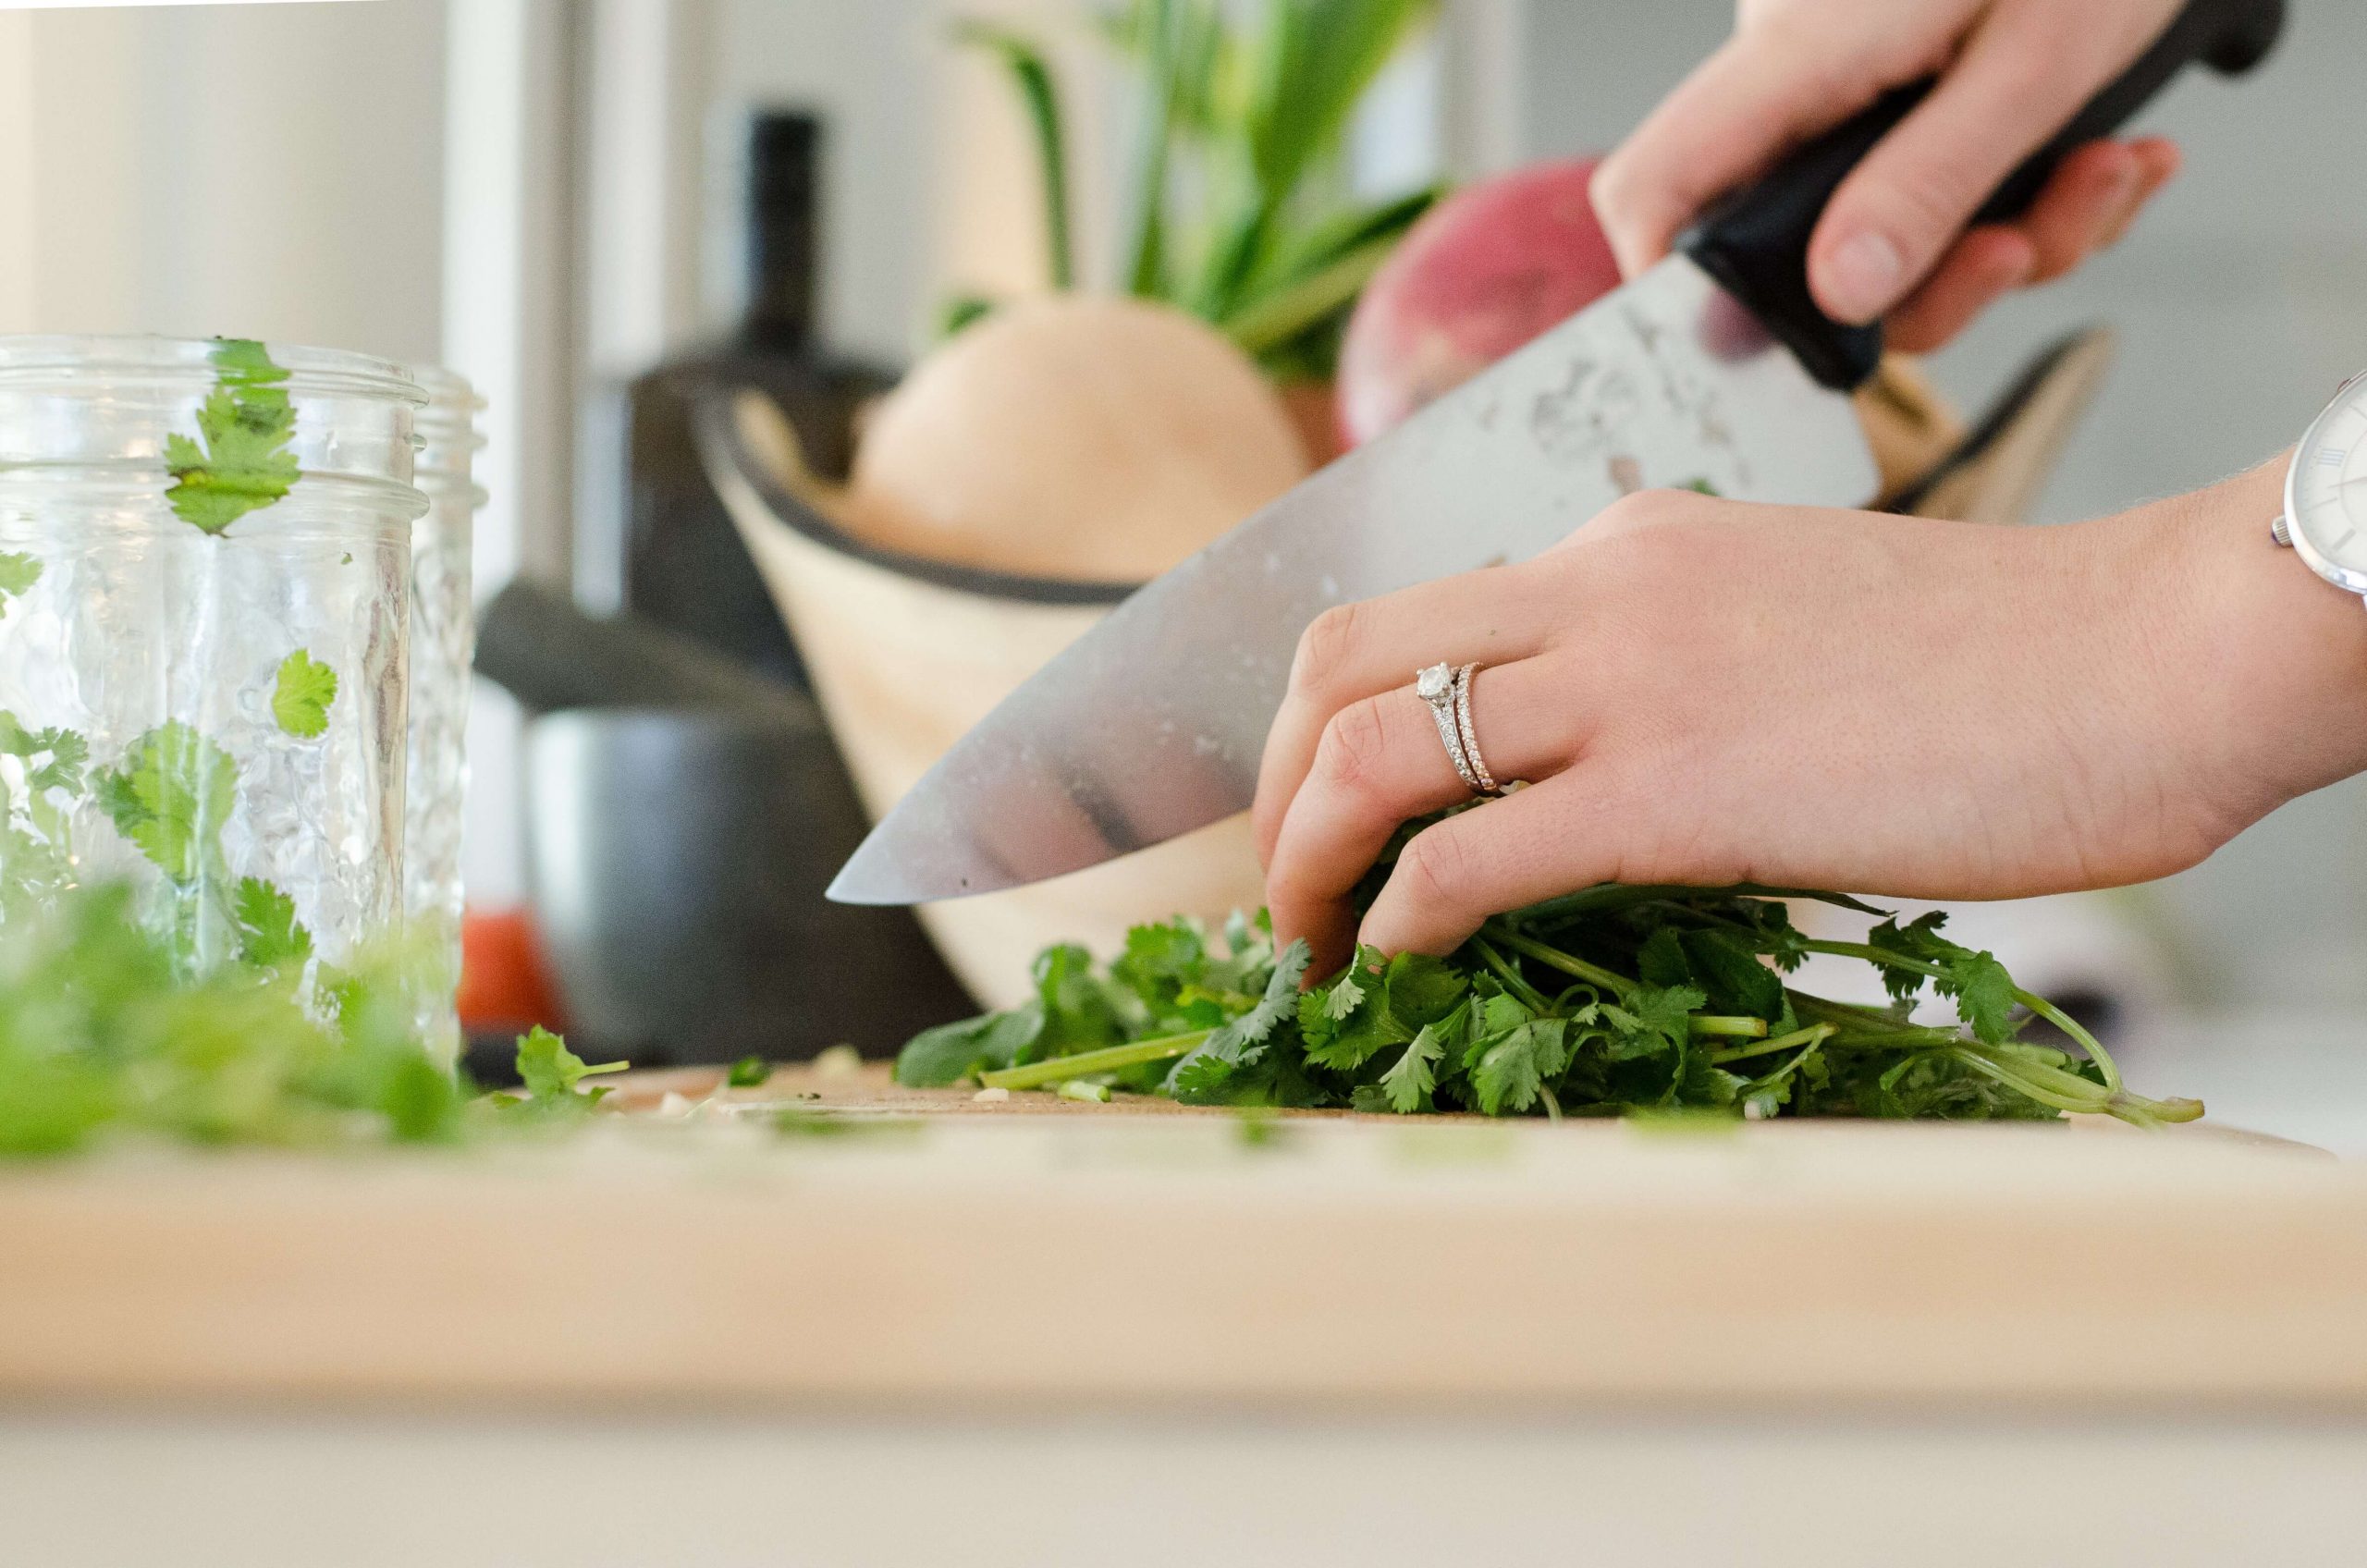 These Tools Are a MUST For All At-Home Chefs